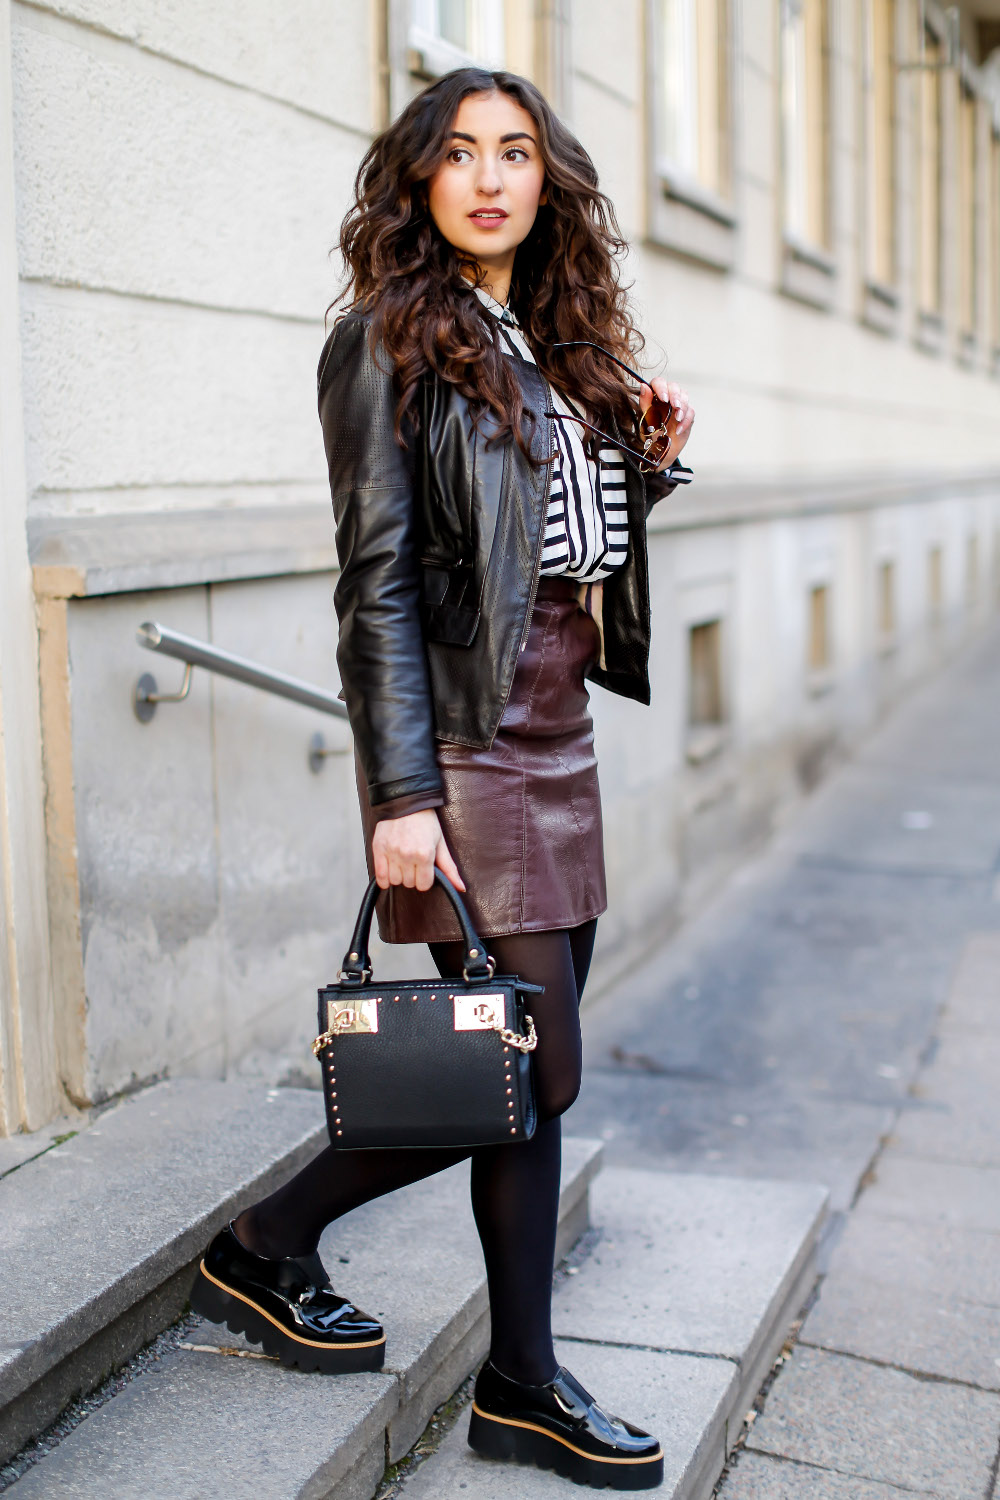 preppy outfit with platform loafers plateau loafers sacha shoes leather skirt and leather jacket chic city streetstyle modeblog outfit frühling spring 2016 samiez